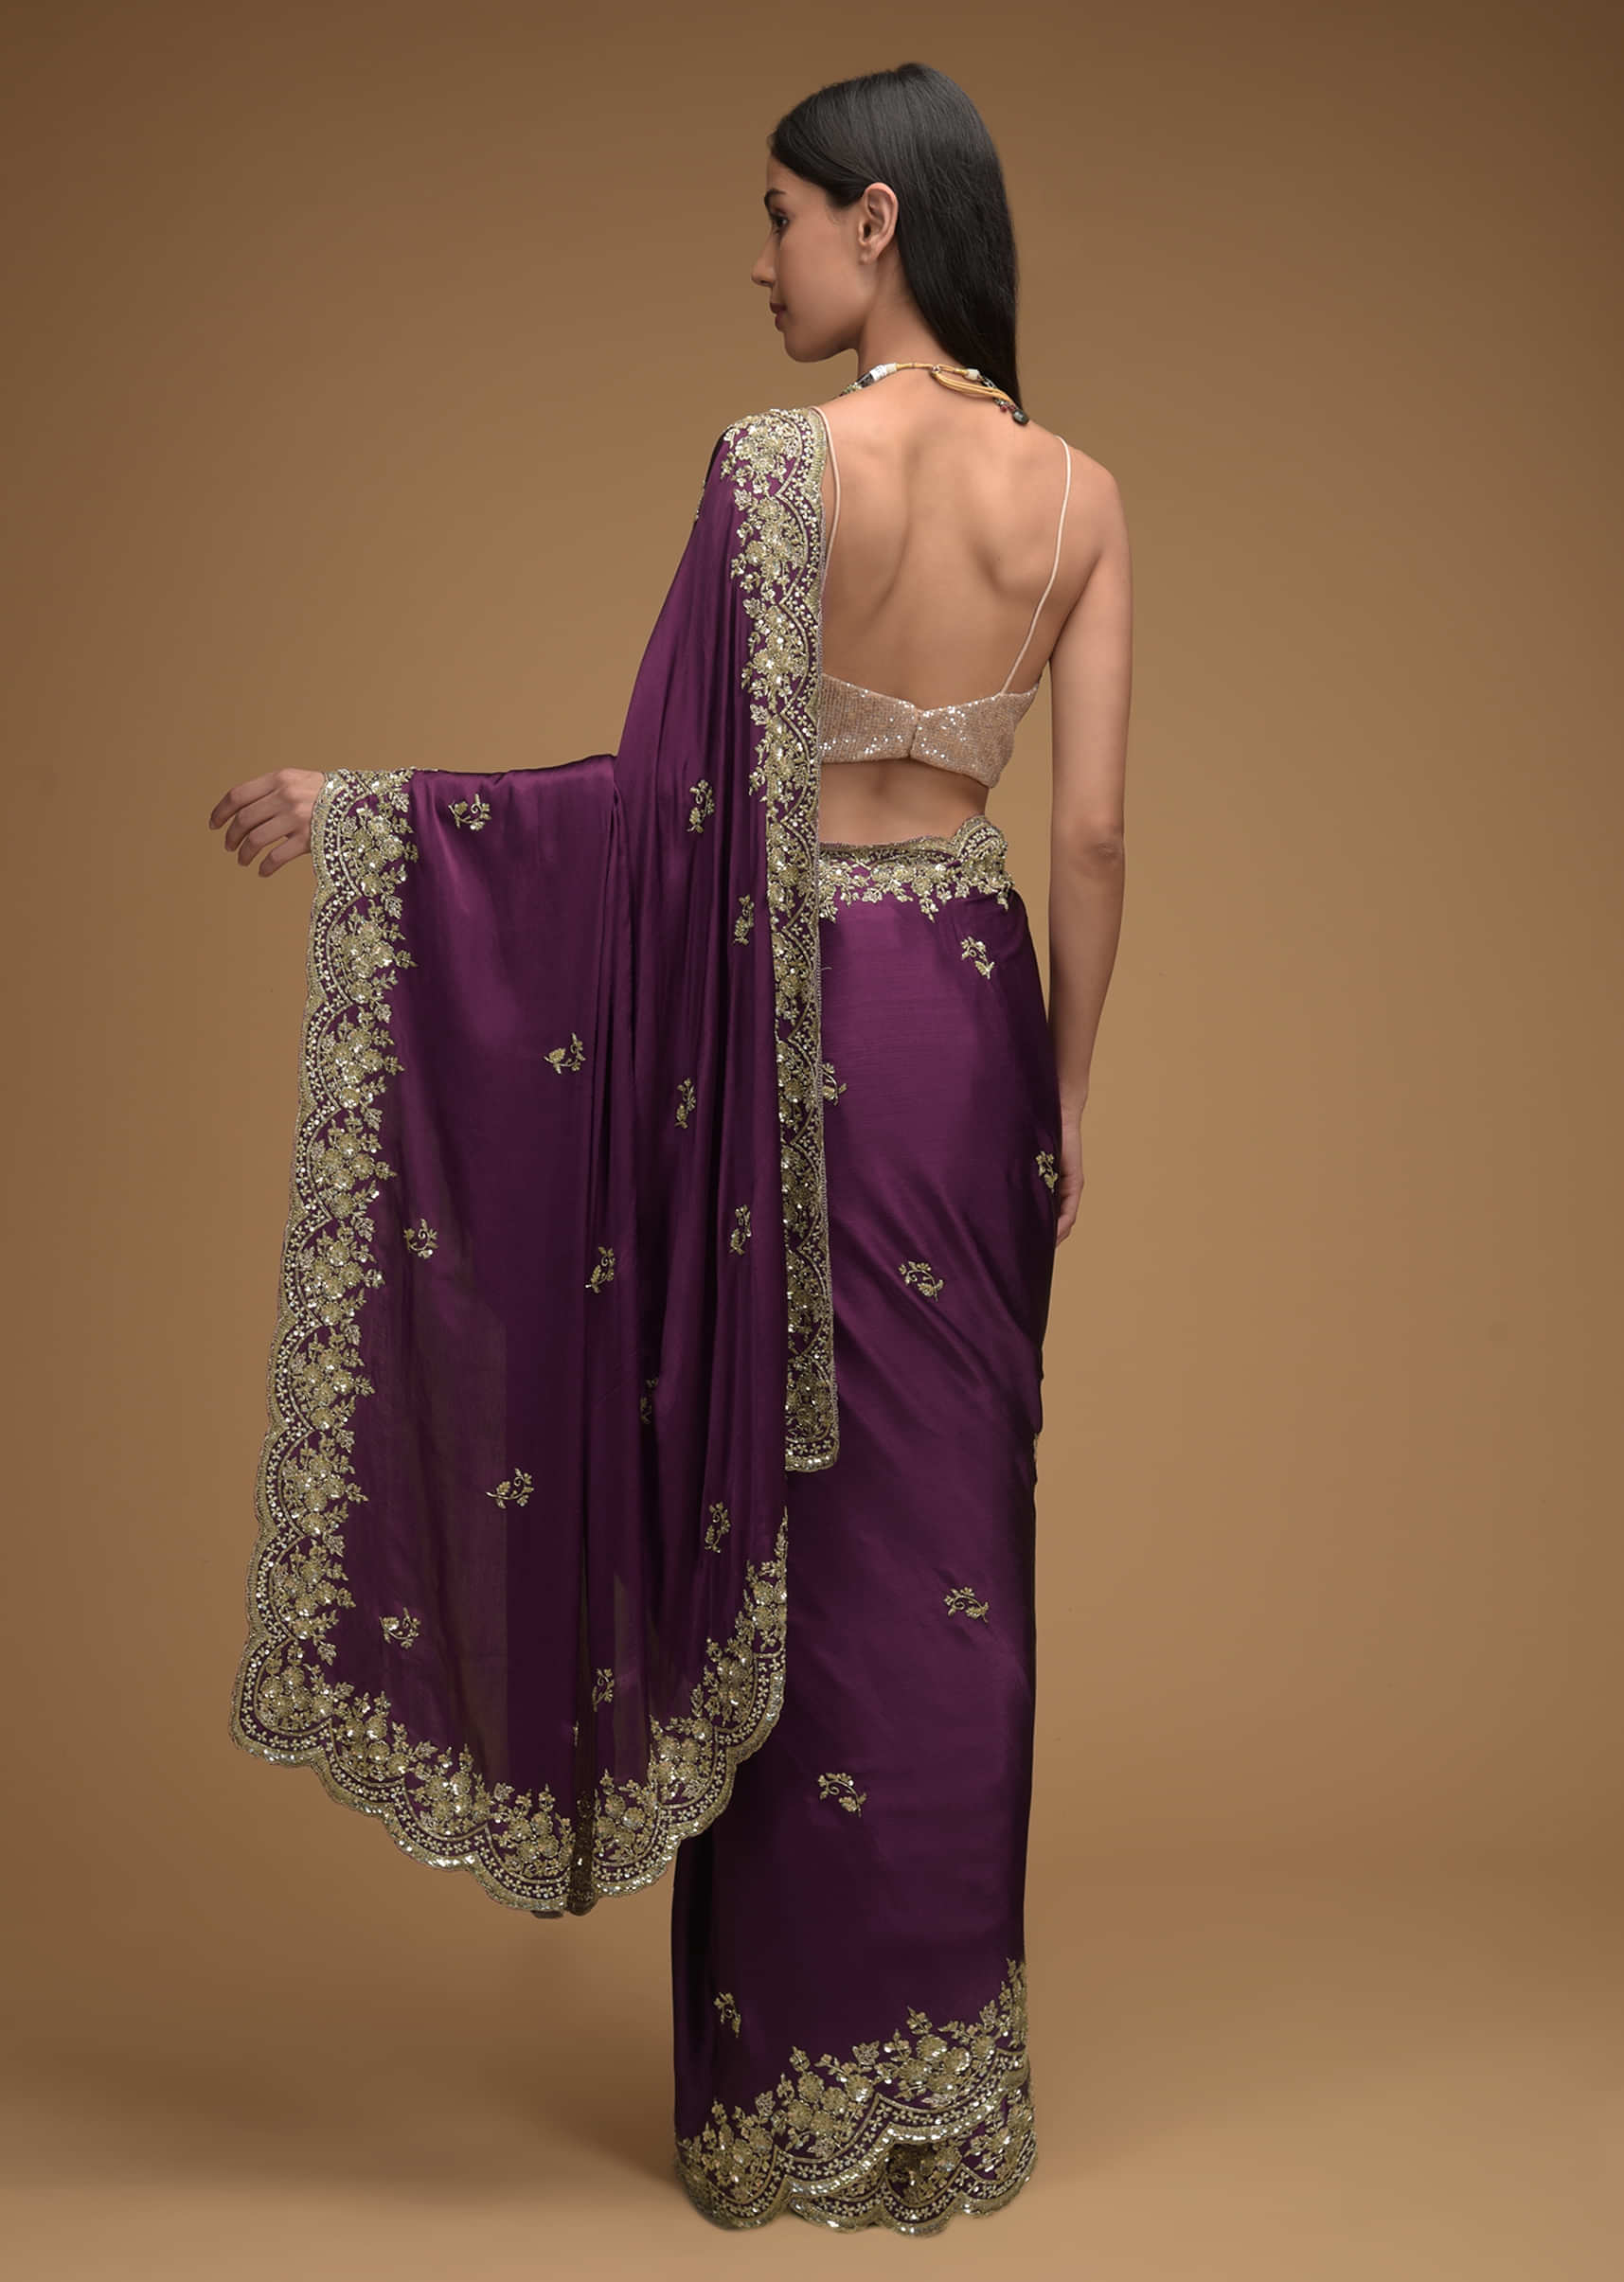 Wine Purple Saree In Satin With Hand Embroidered Scalloped Border And Floral Buttis Along With Unstitched Blouse  